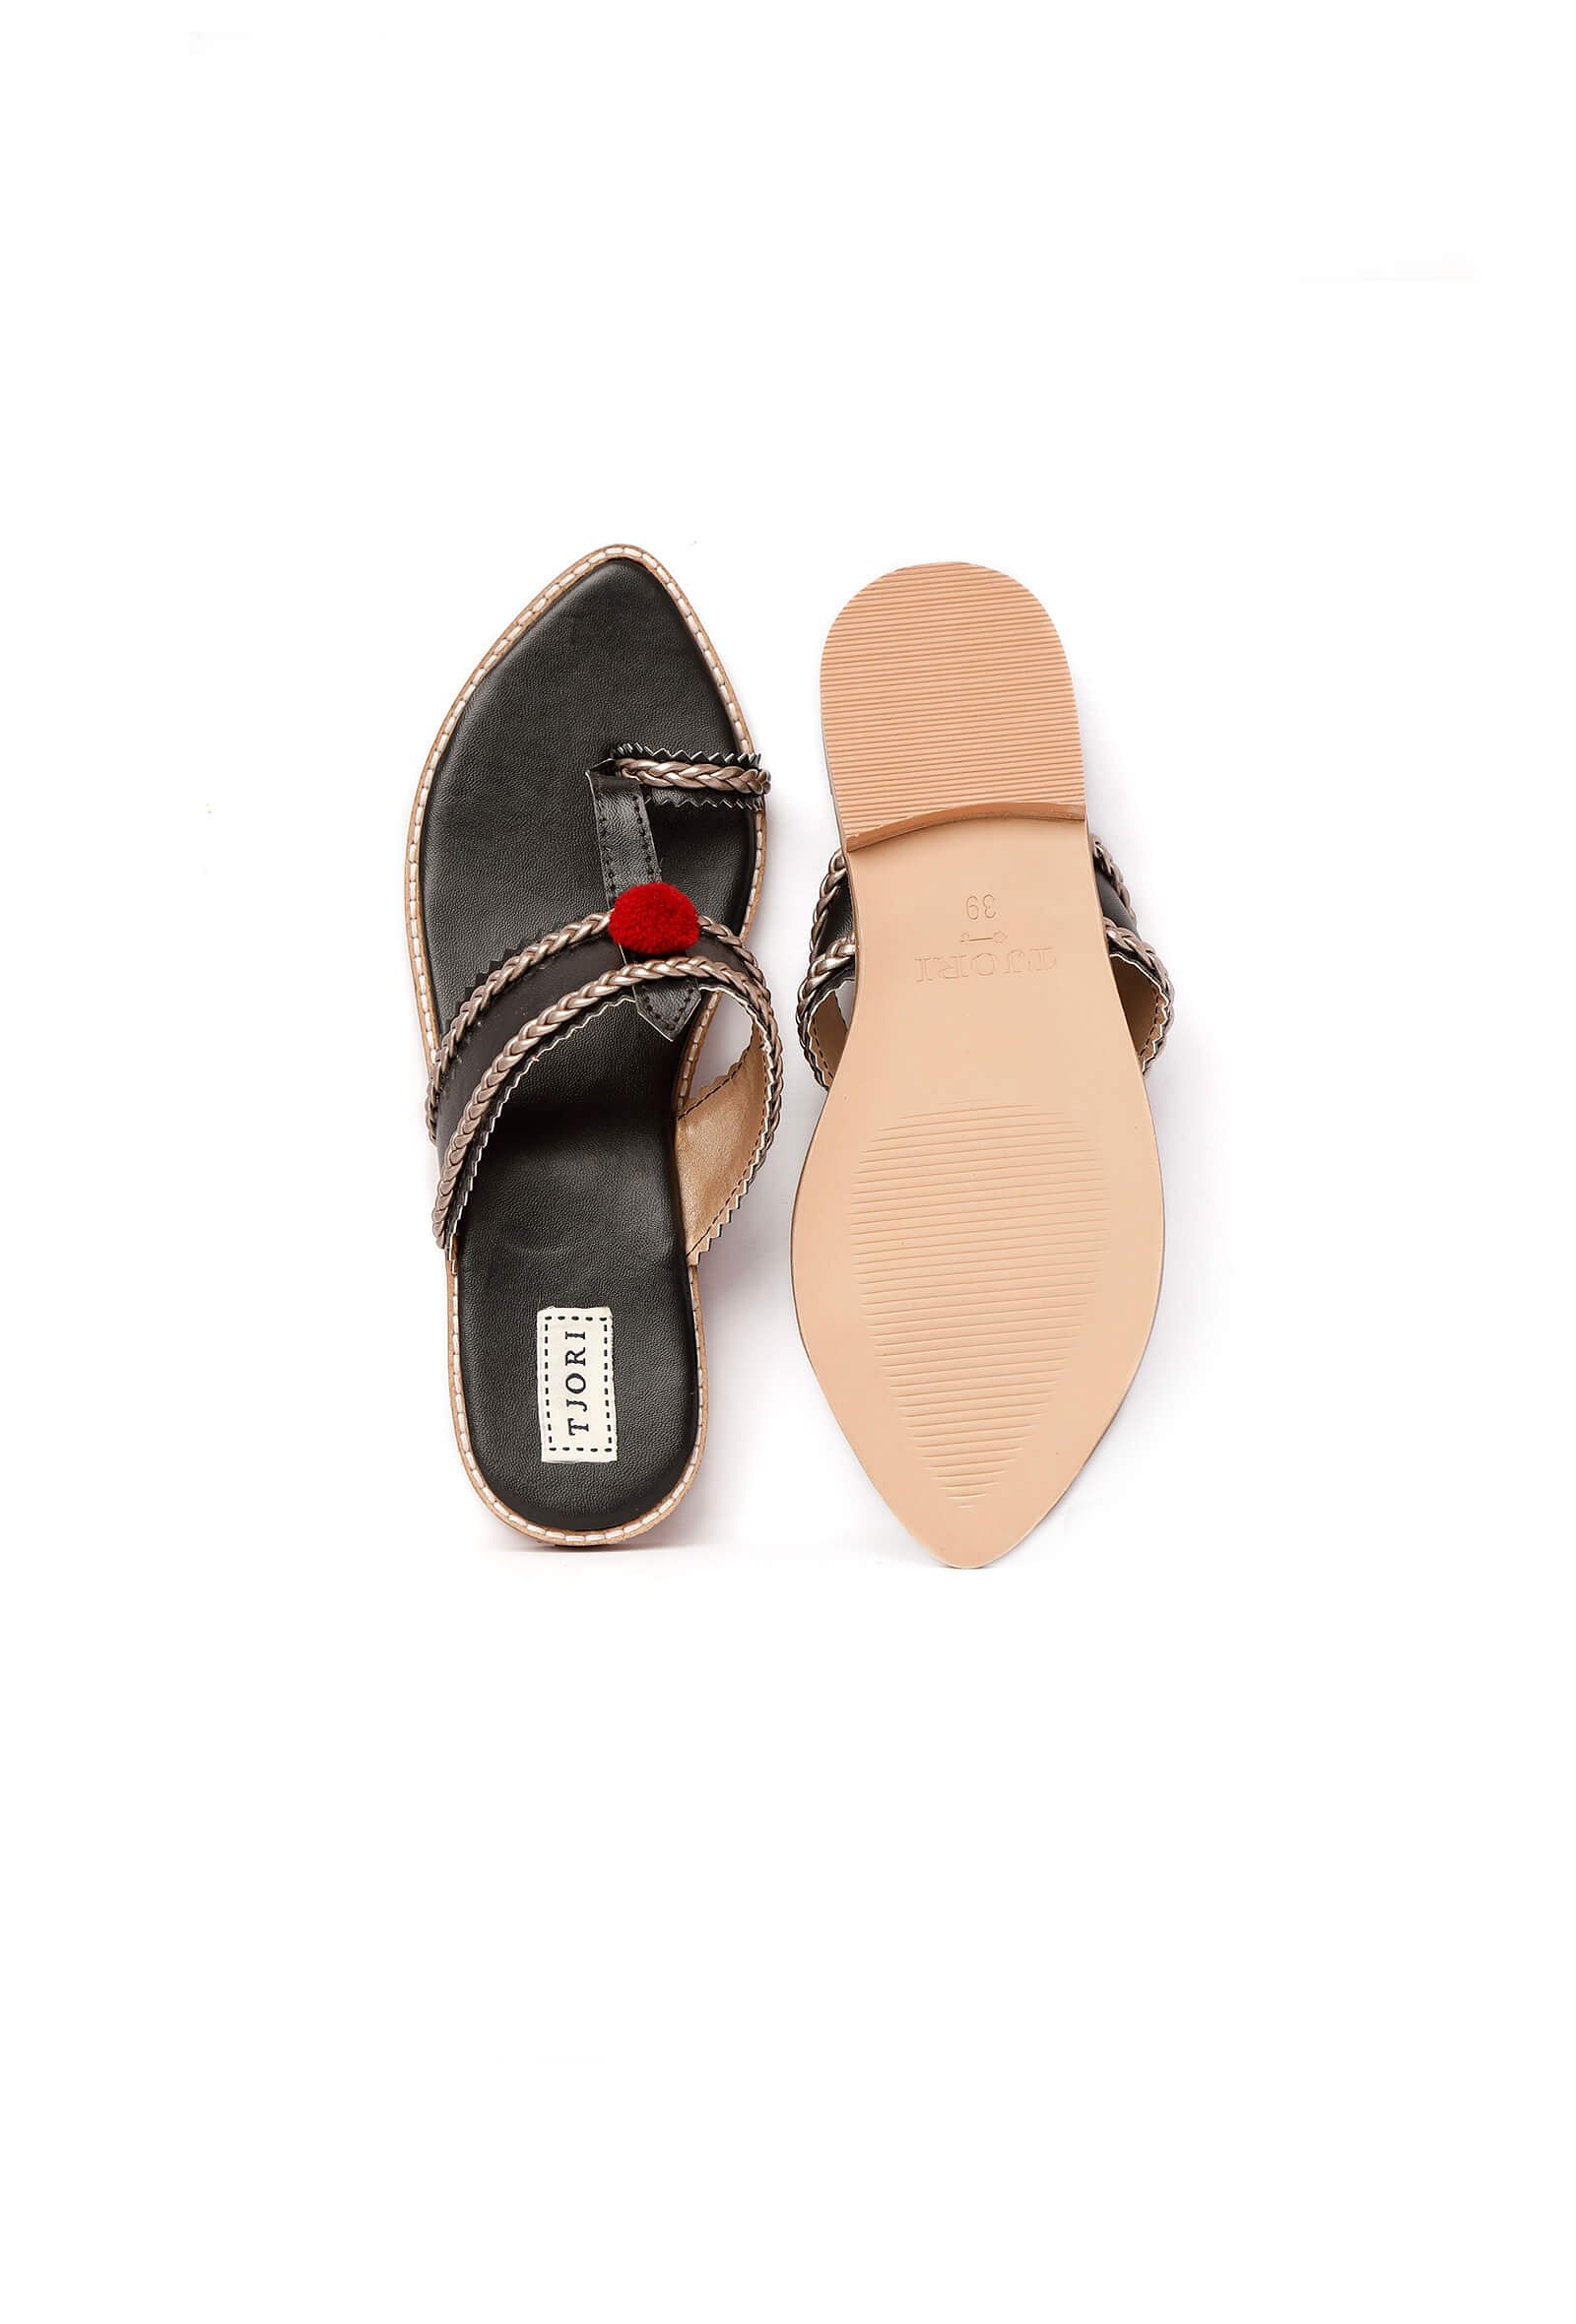 Black & Silver Cruelty Free Leather Sandals with Red Pom Poms